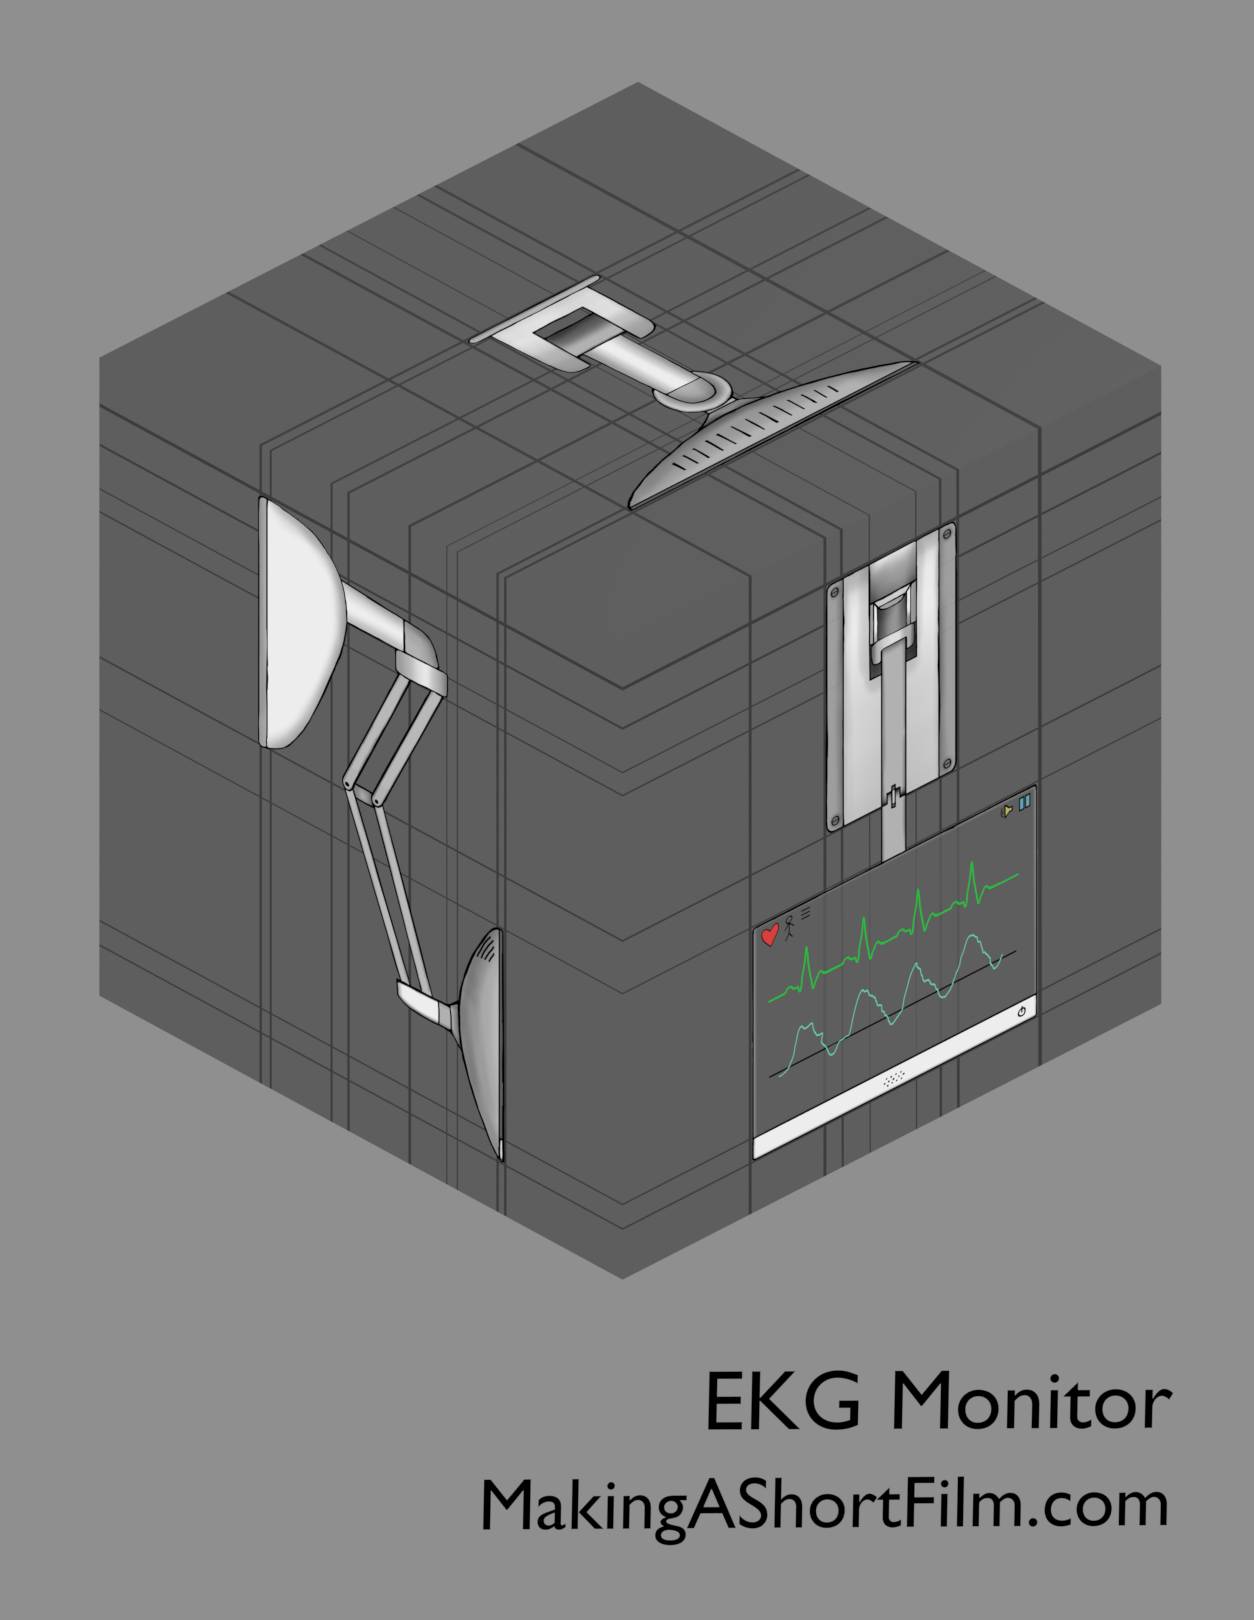 The concept art design for the EKG monitor presented in 3D with relationship lines